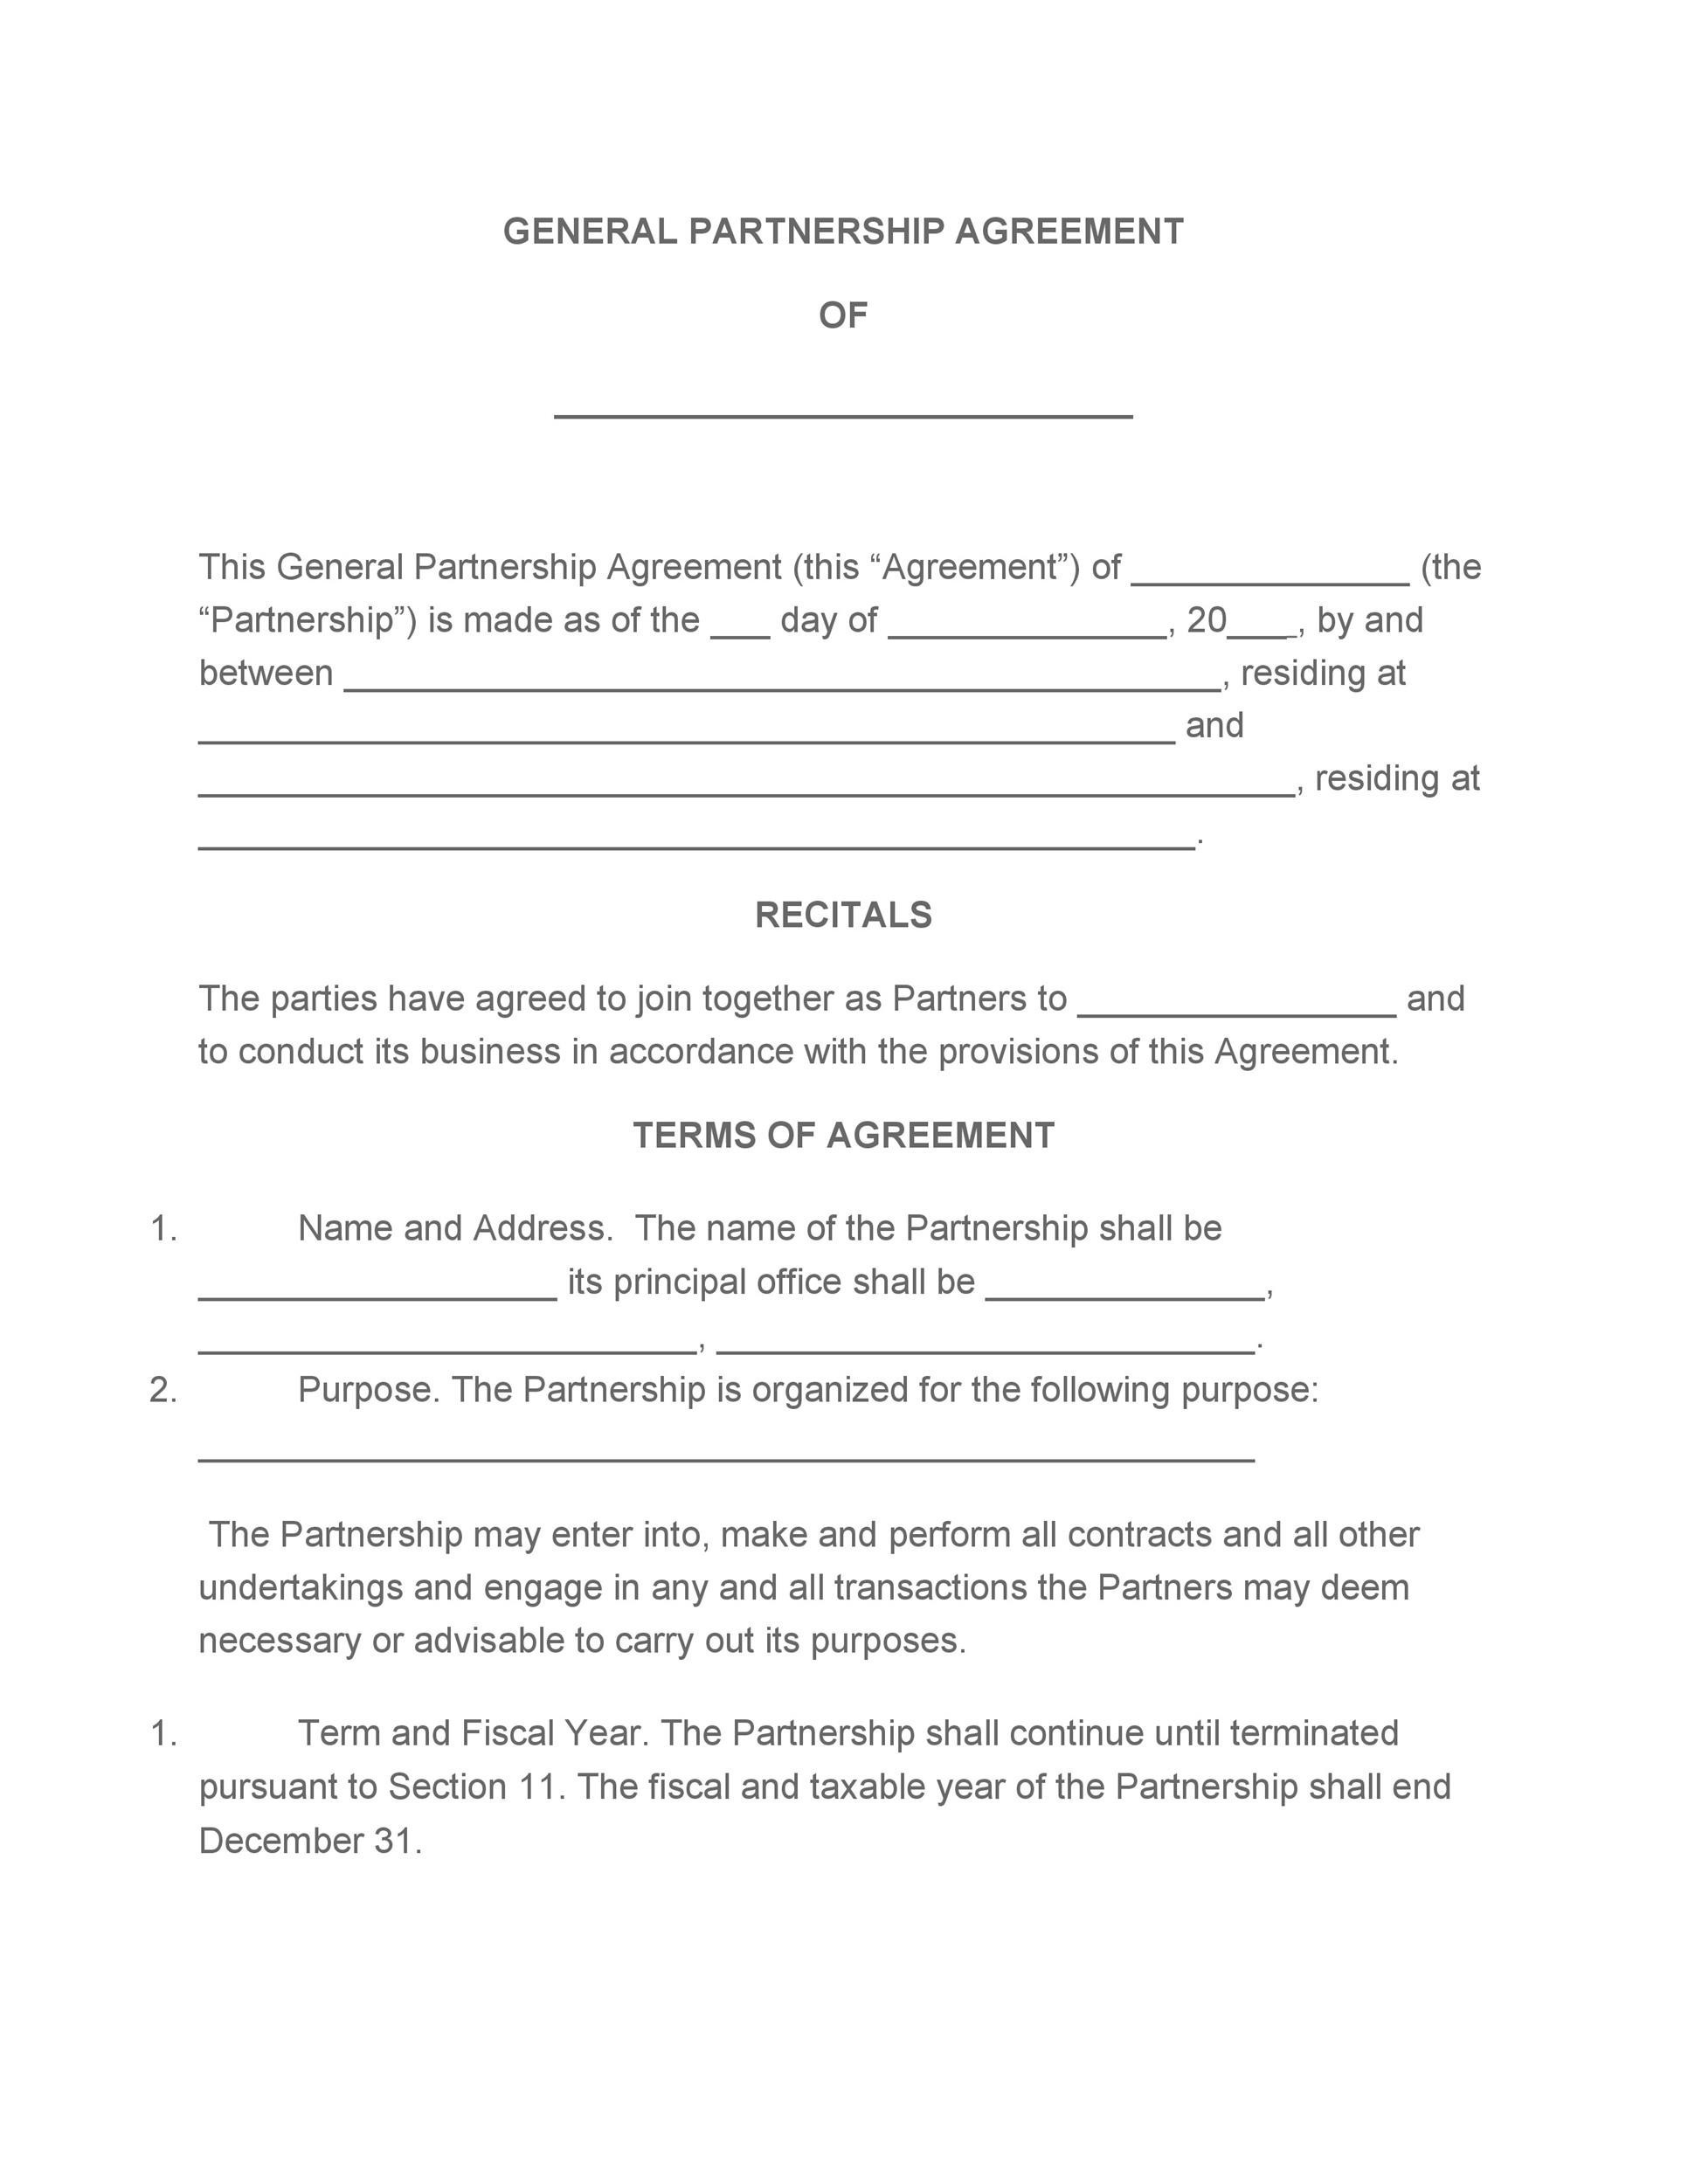 Partnership agreement template free download productivity and time management for the overwhelmed download